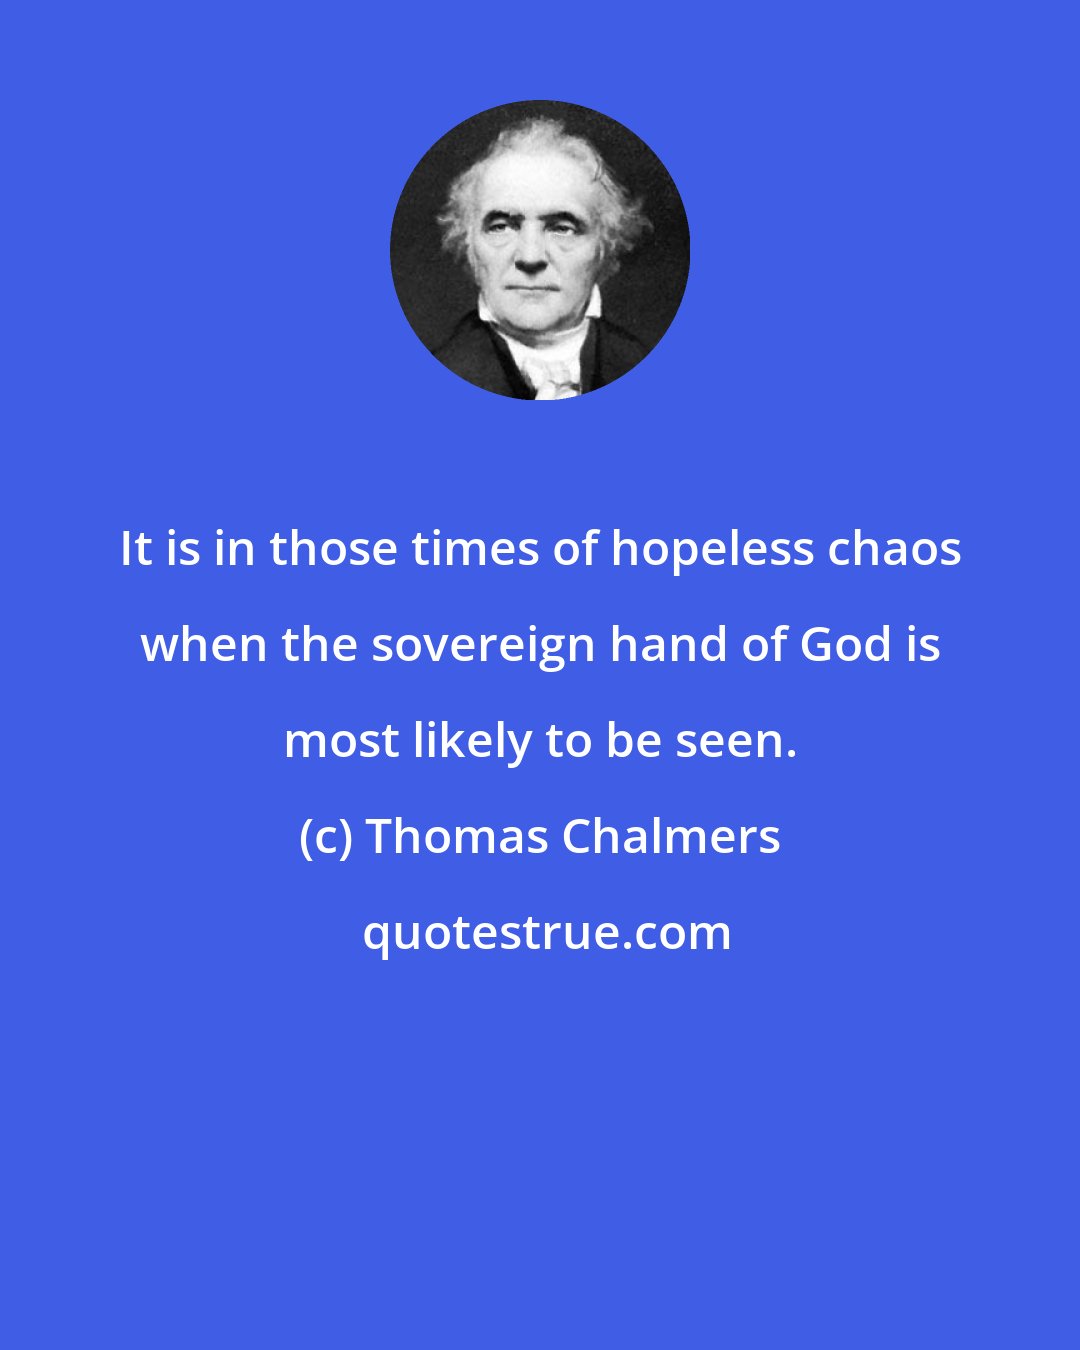 Thomas Chalmers: It is in those times of hopeless chaos when the sovereign hand of God is most likely to be seen.